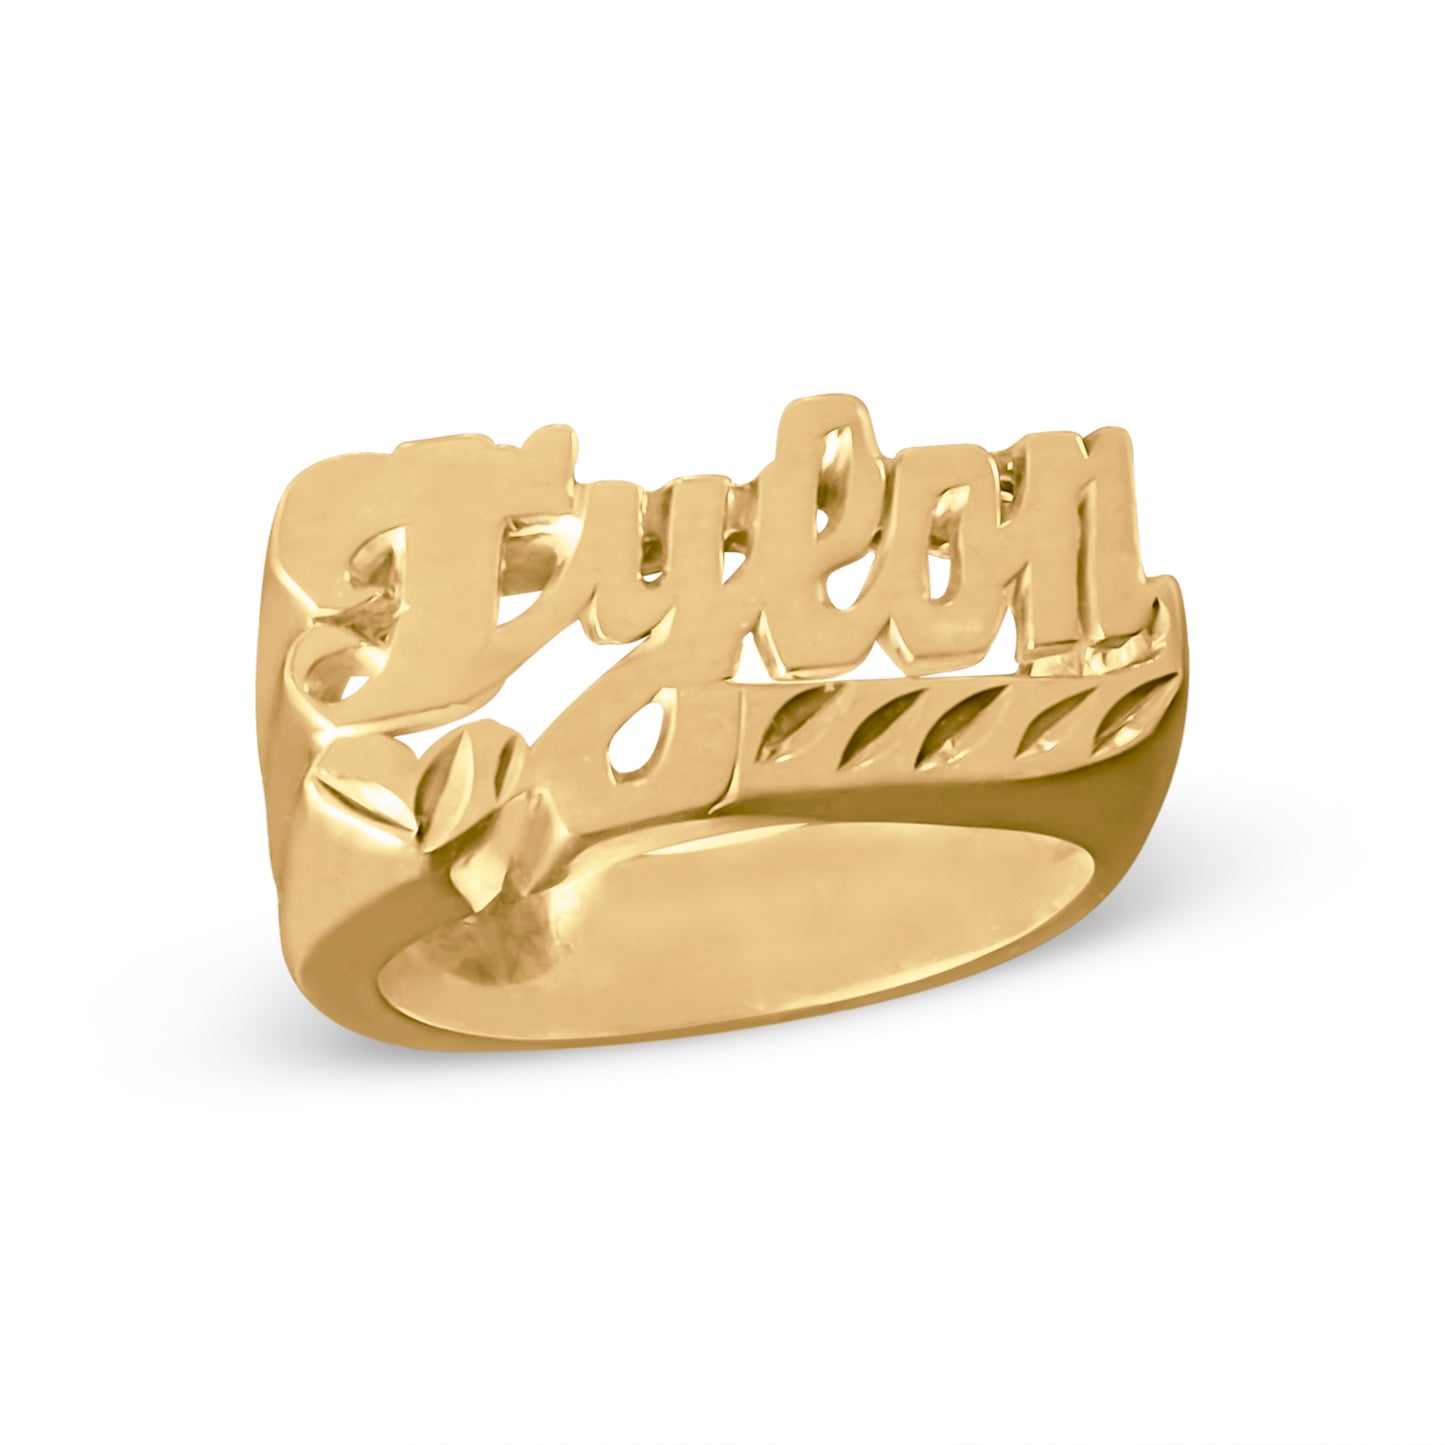 Lively Script Cut Out Name Name Ring